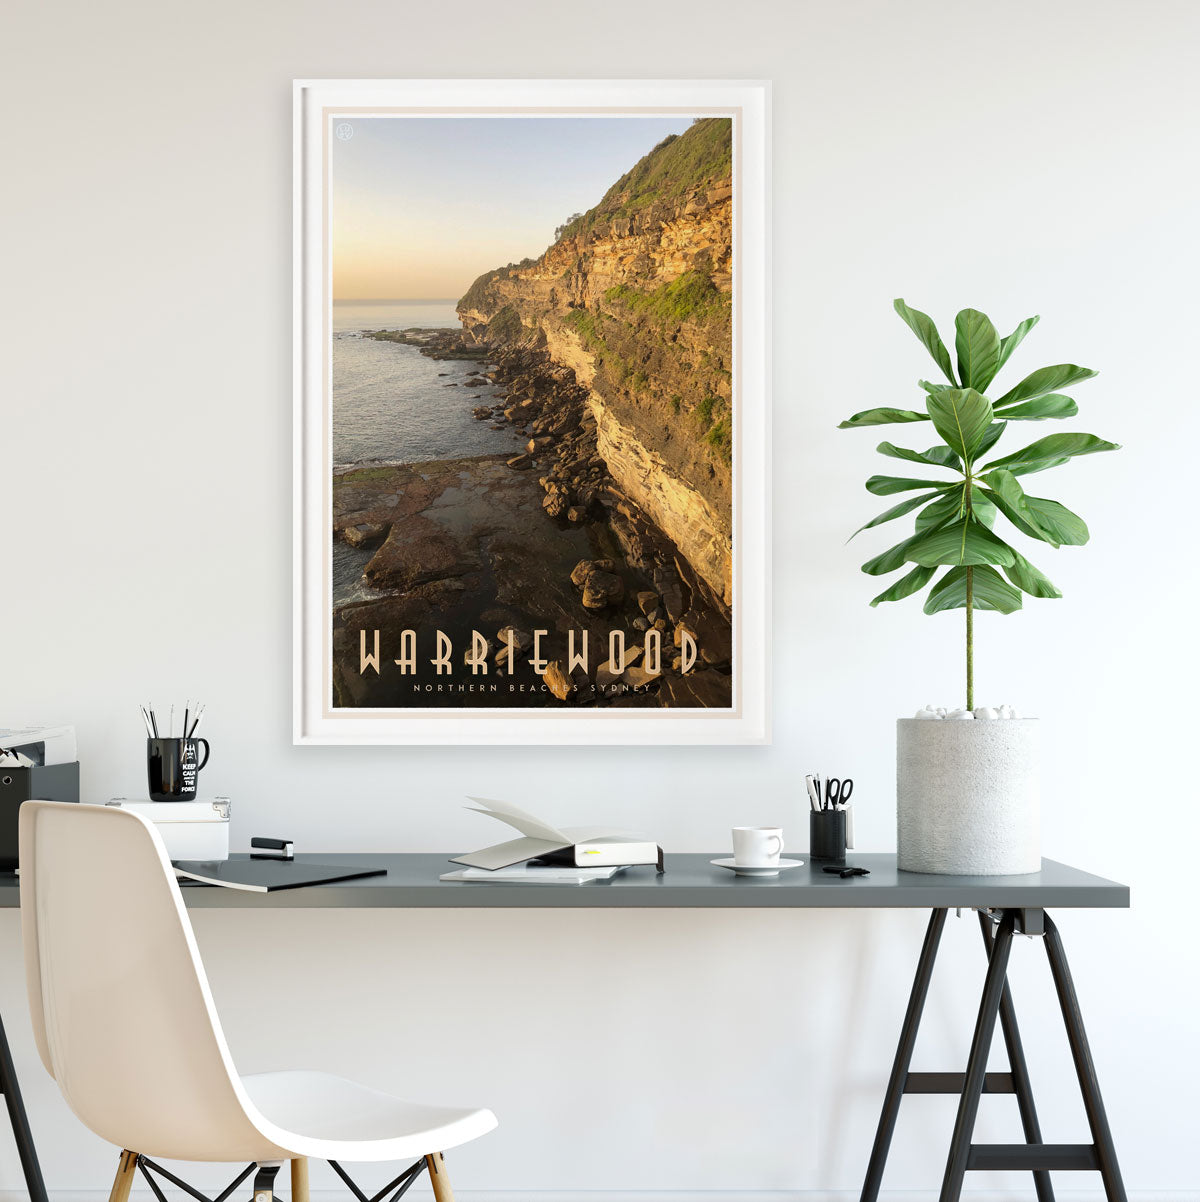 Warriewood vintage travel style poster by places we luv